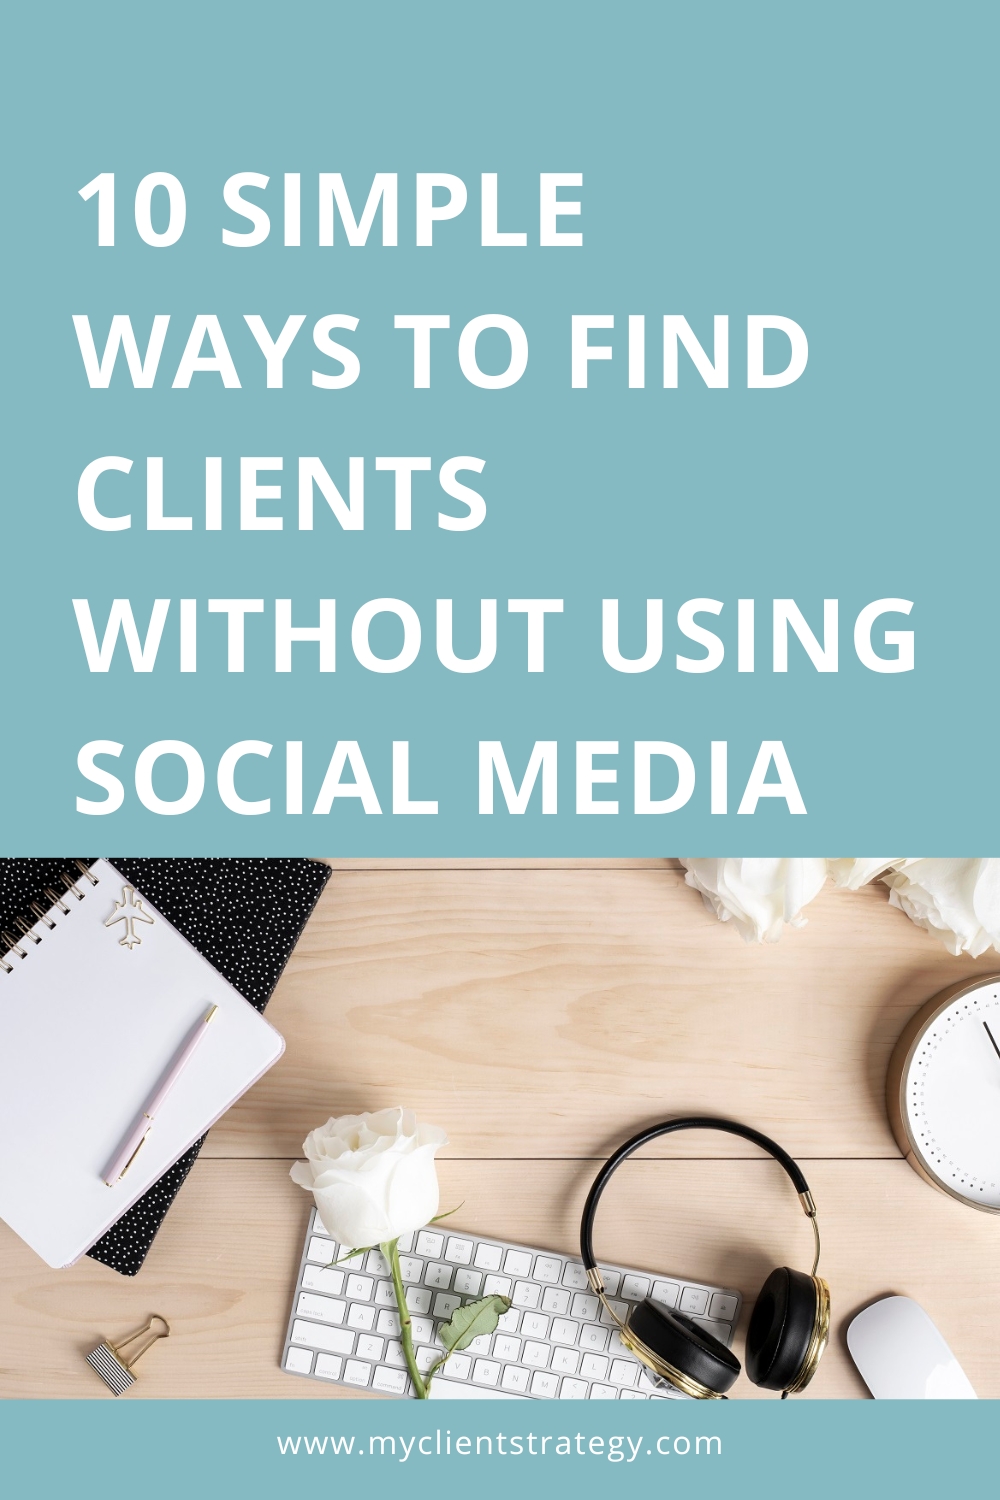 10 simple ways to find clients without using social media” width=